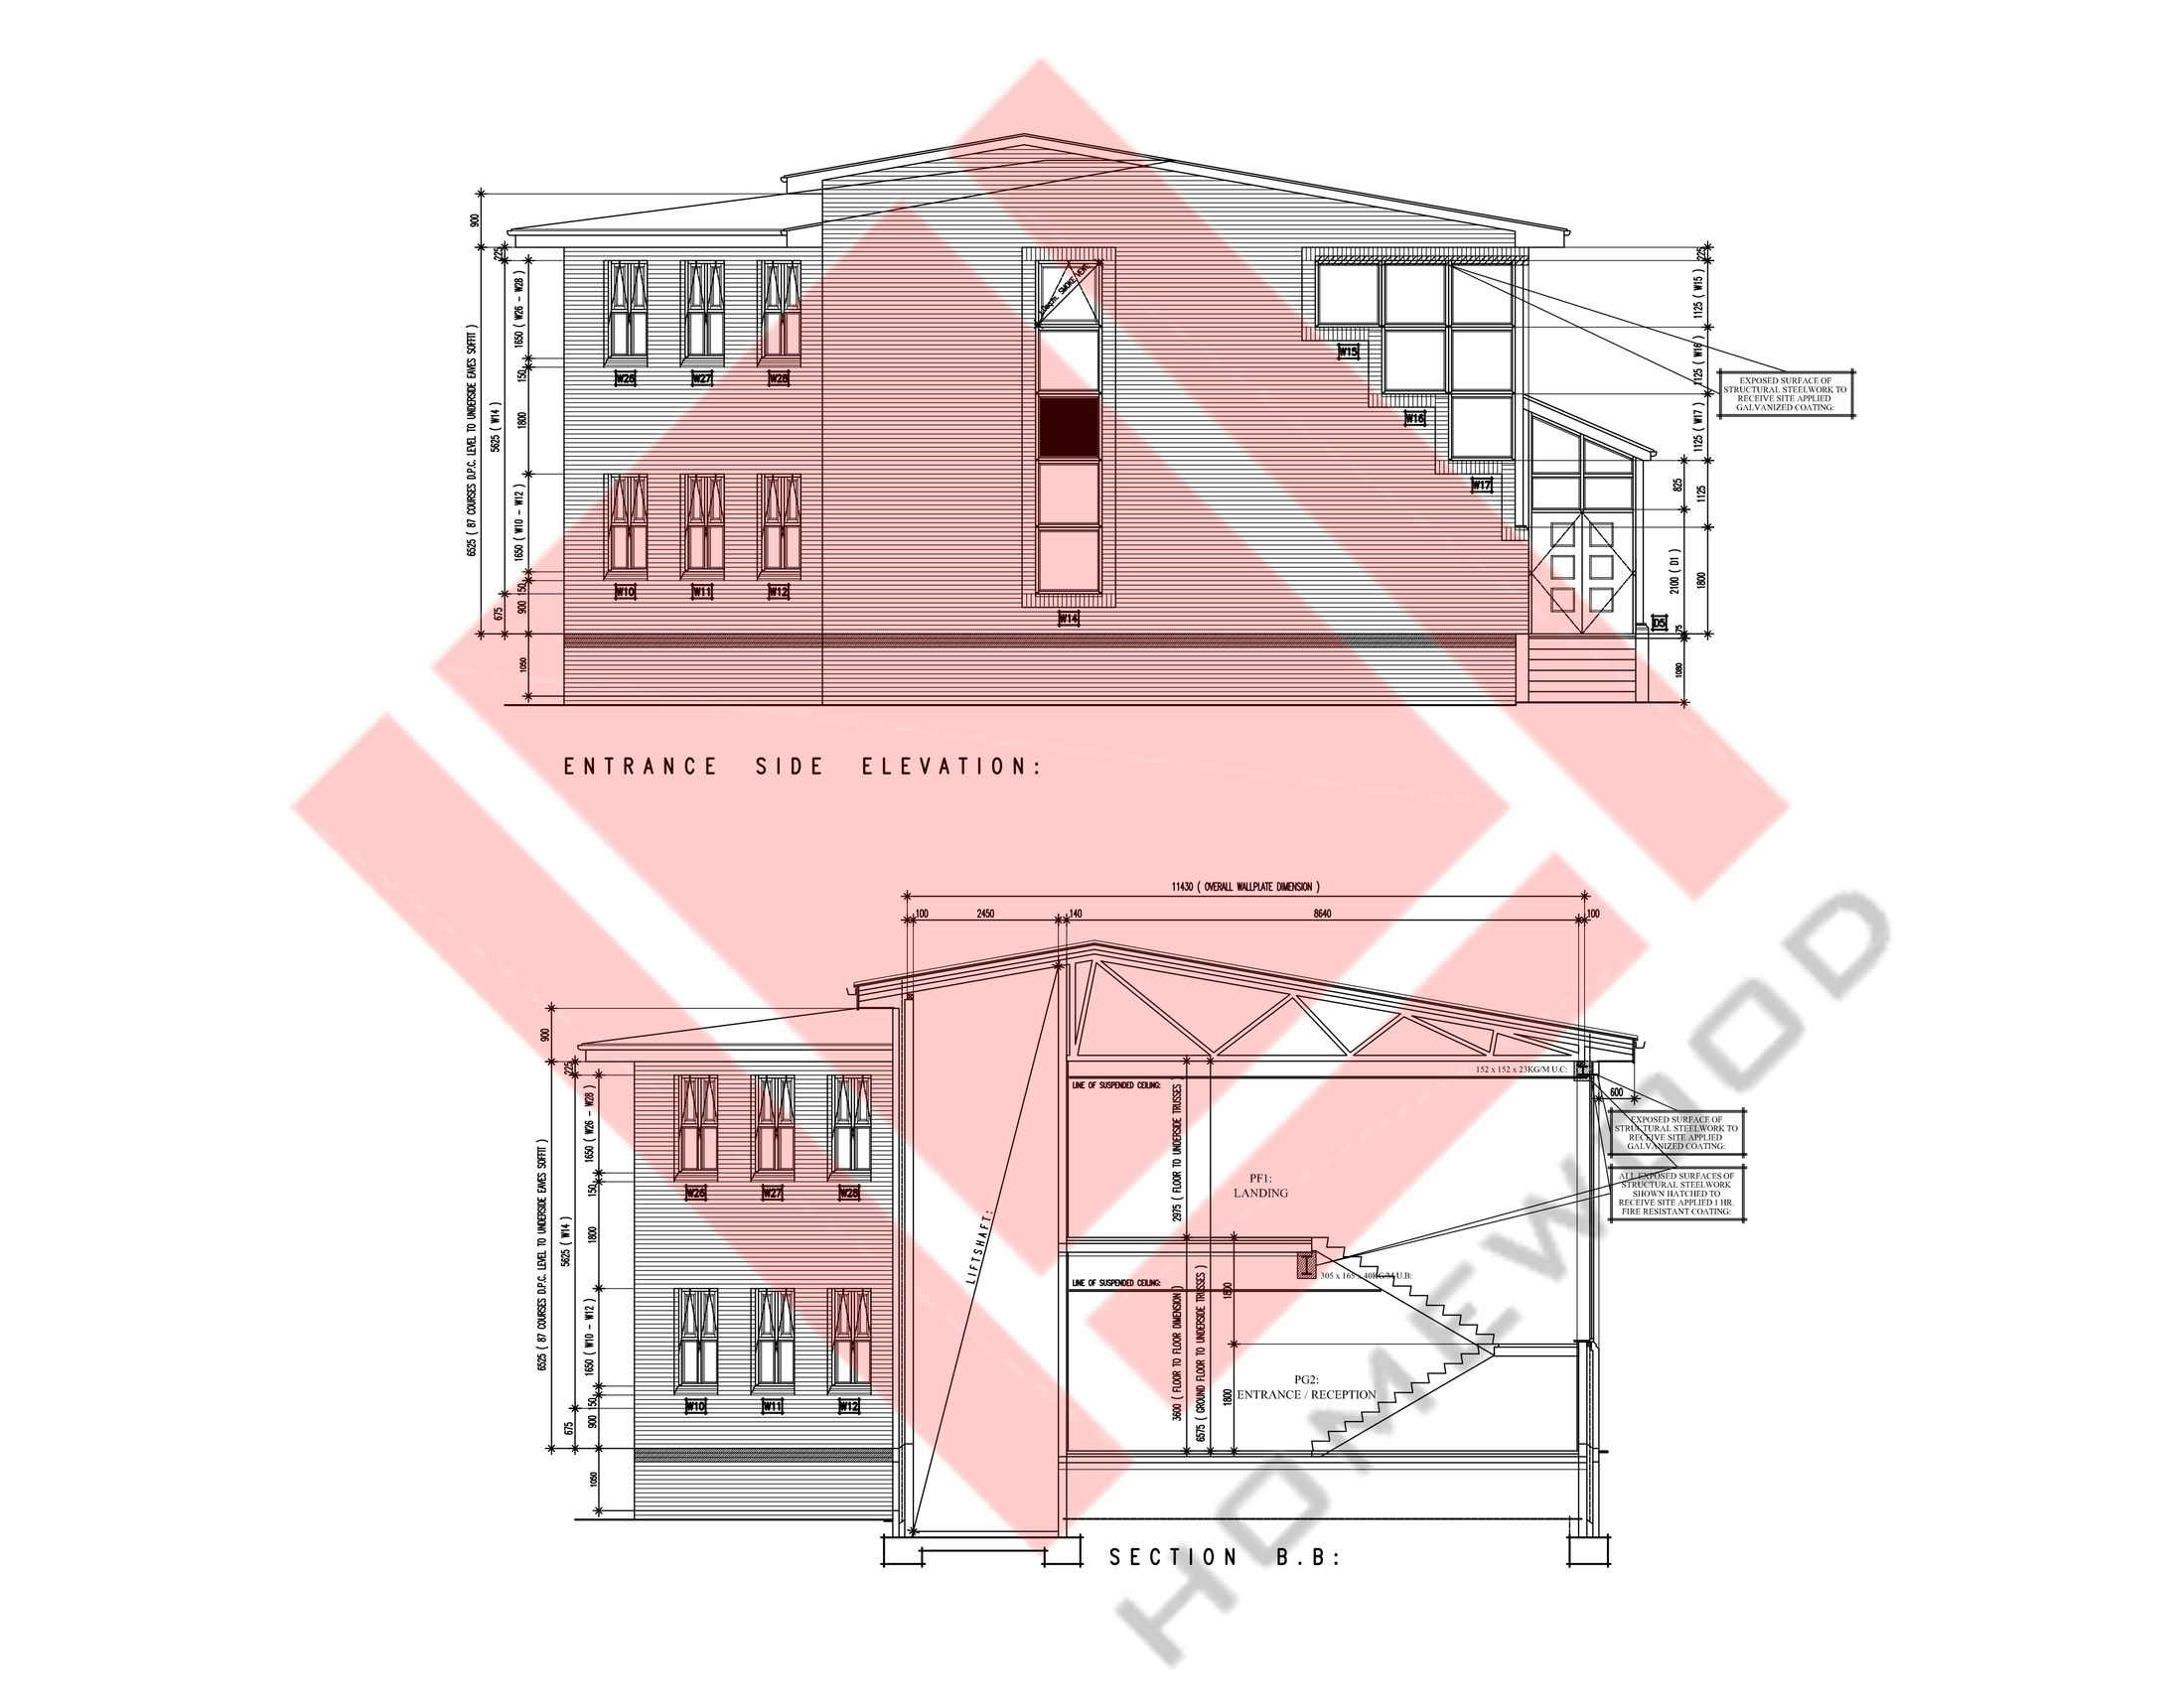 02 Elevation & Section.Image.Marked_1.png